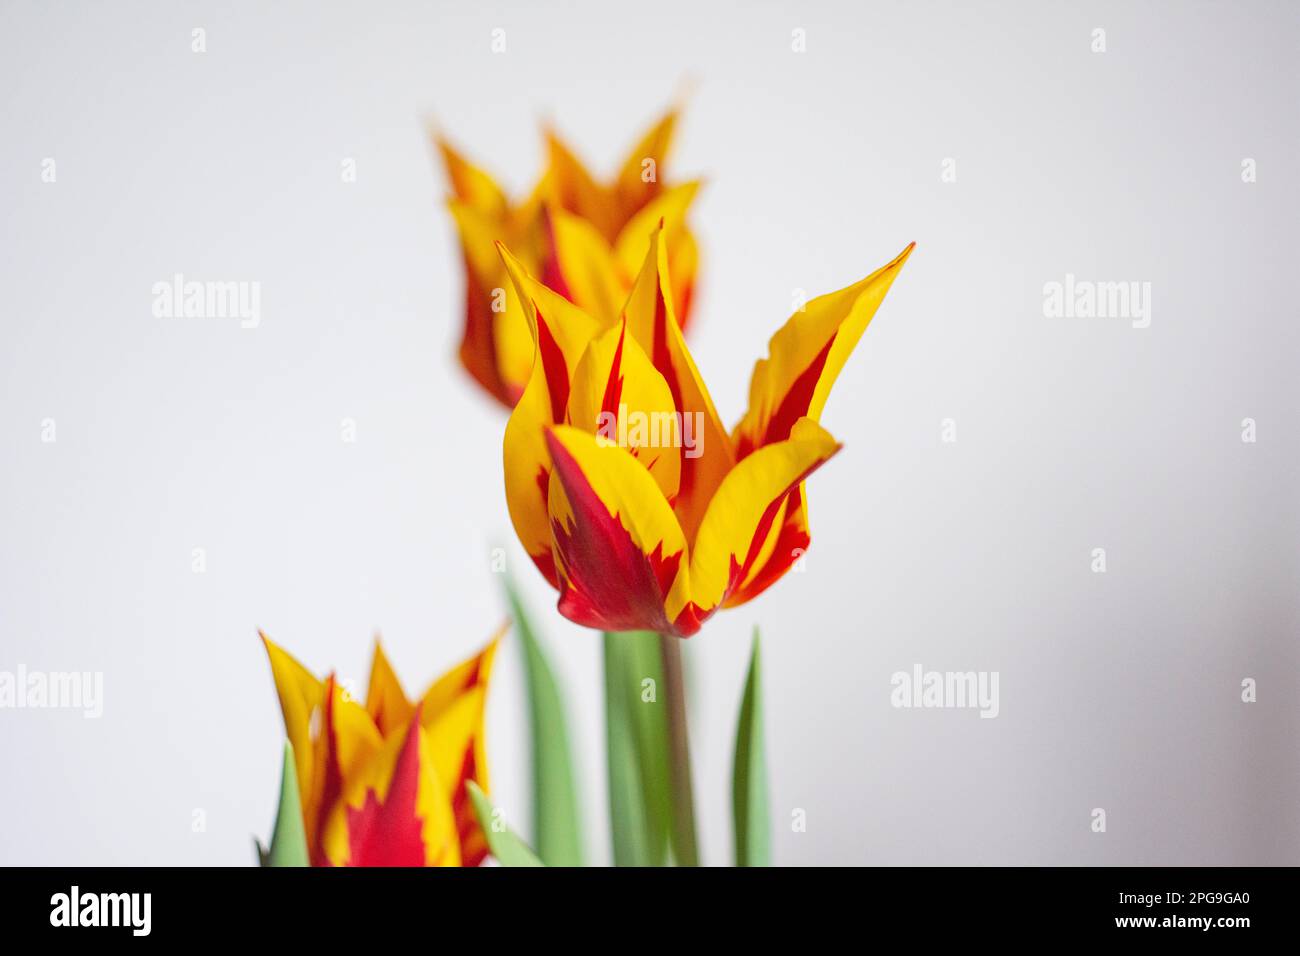 Yellow-red unfolded tulips on a white background in sunlight. Stock Photo